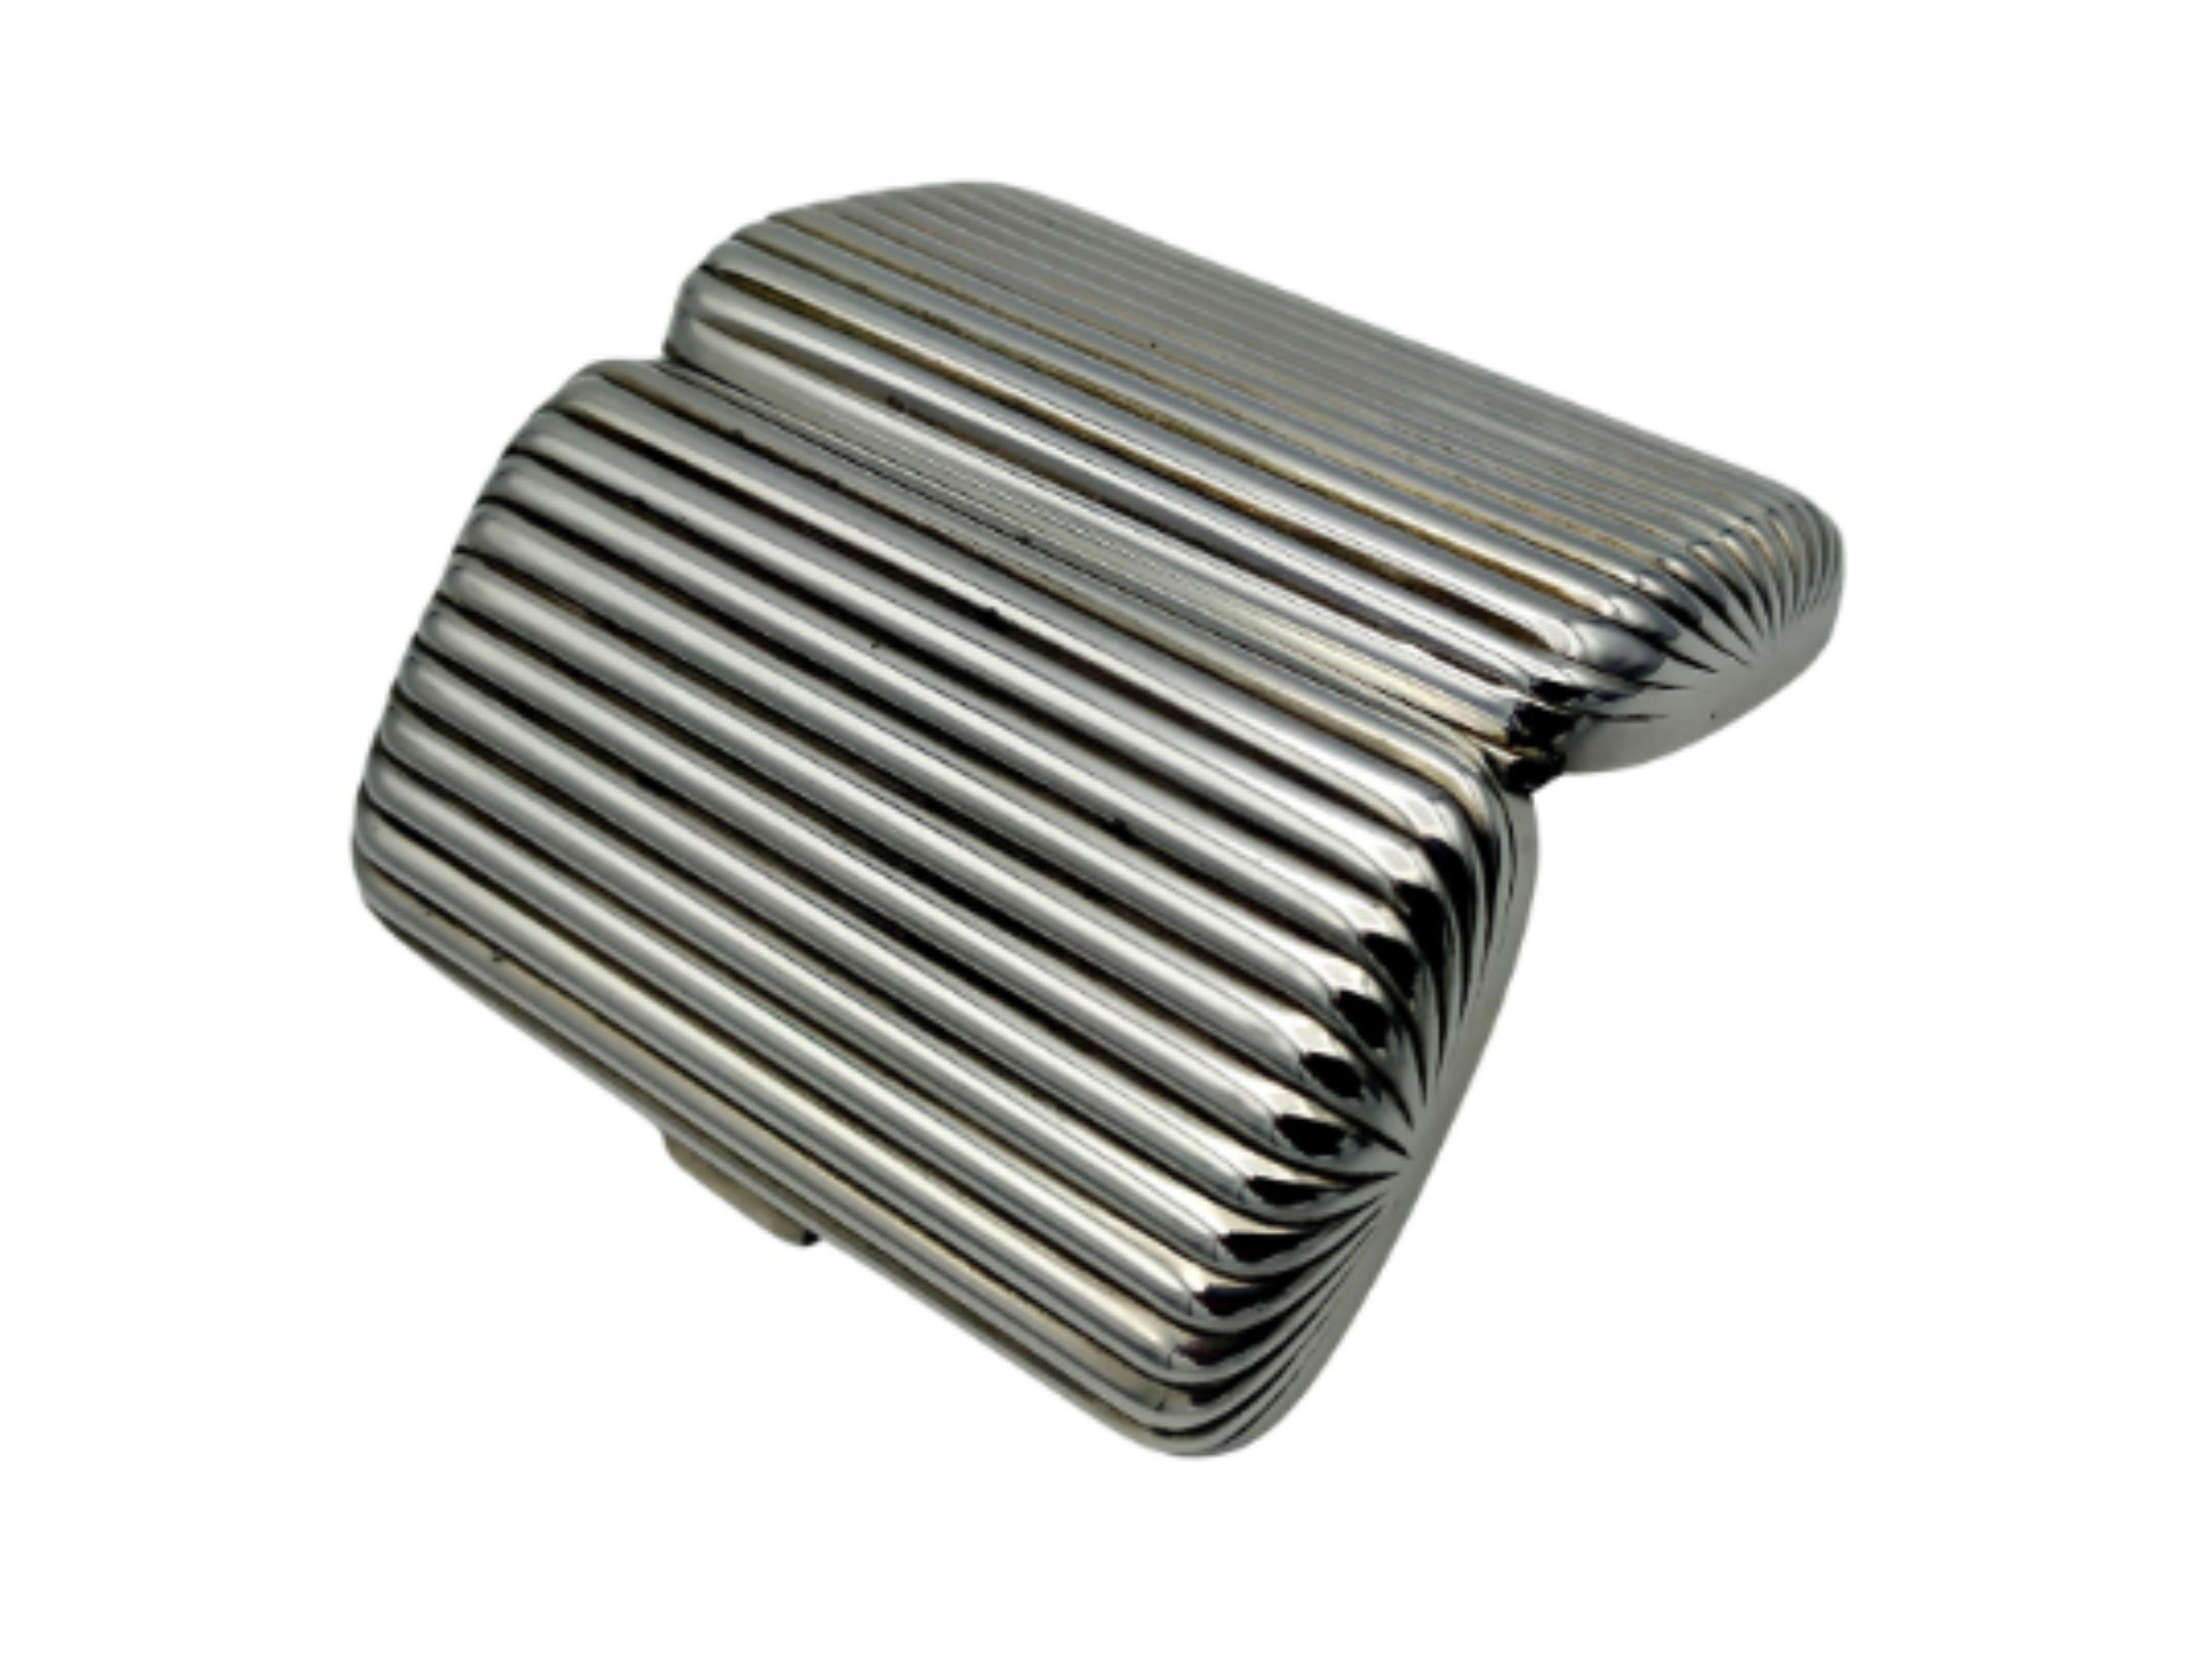 Striped cigarette case, oval section in 925/1000 sterling silver, button and spring opening, early 20th century Art Deco style. Measurements cm. 9.5 x 5.5 x 2.5 Weight gr. 125. Designed in 1936 and produced in 1979 in the Salimbeni factory with